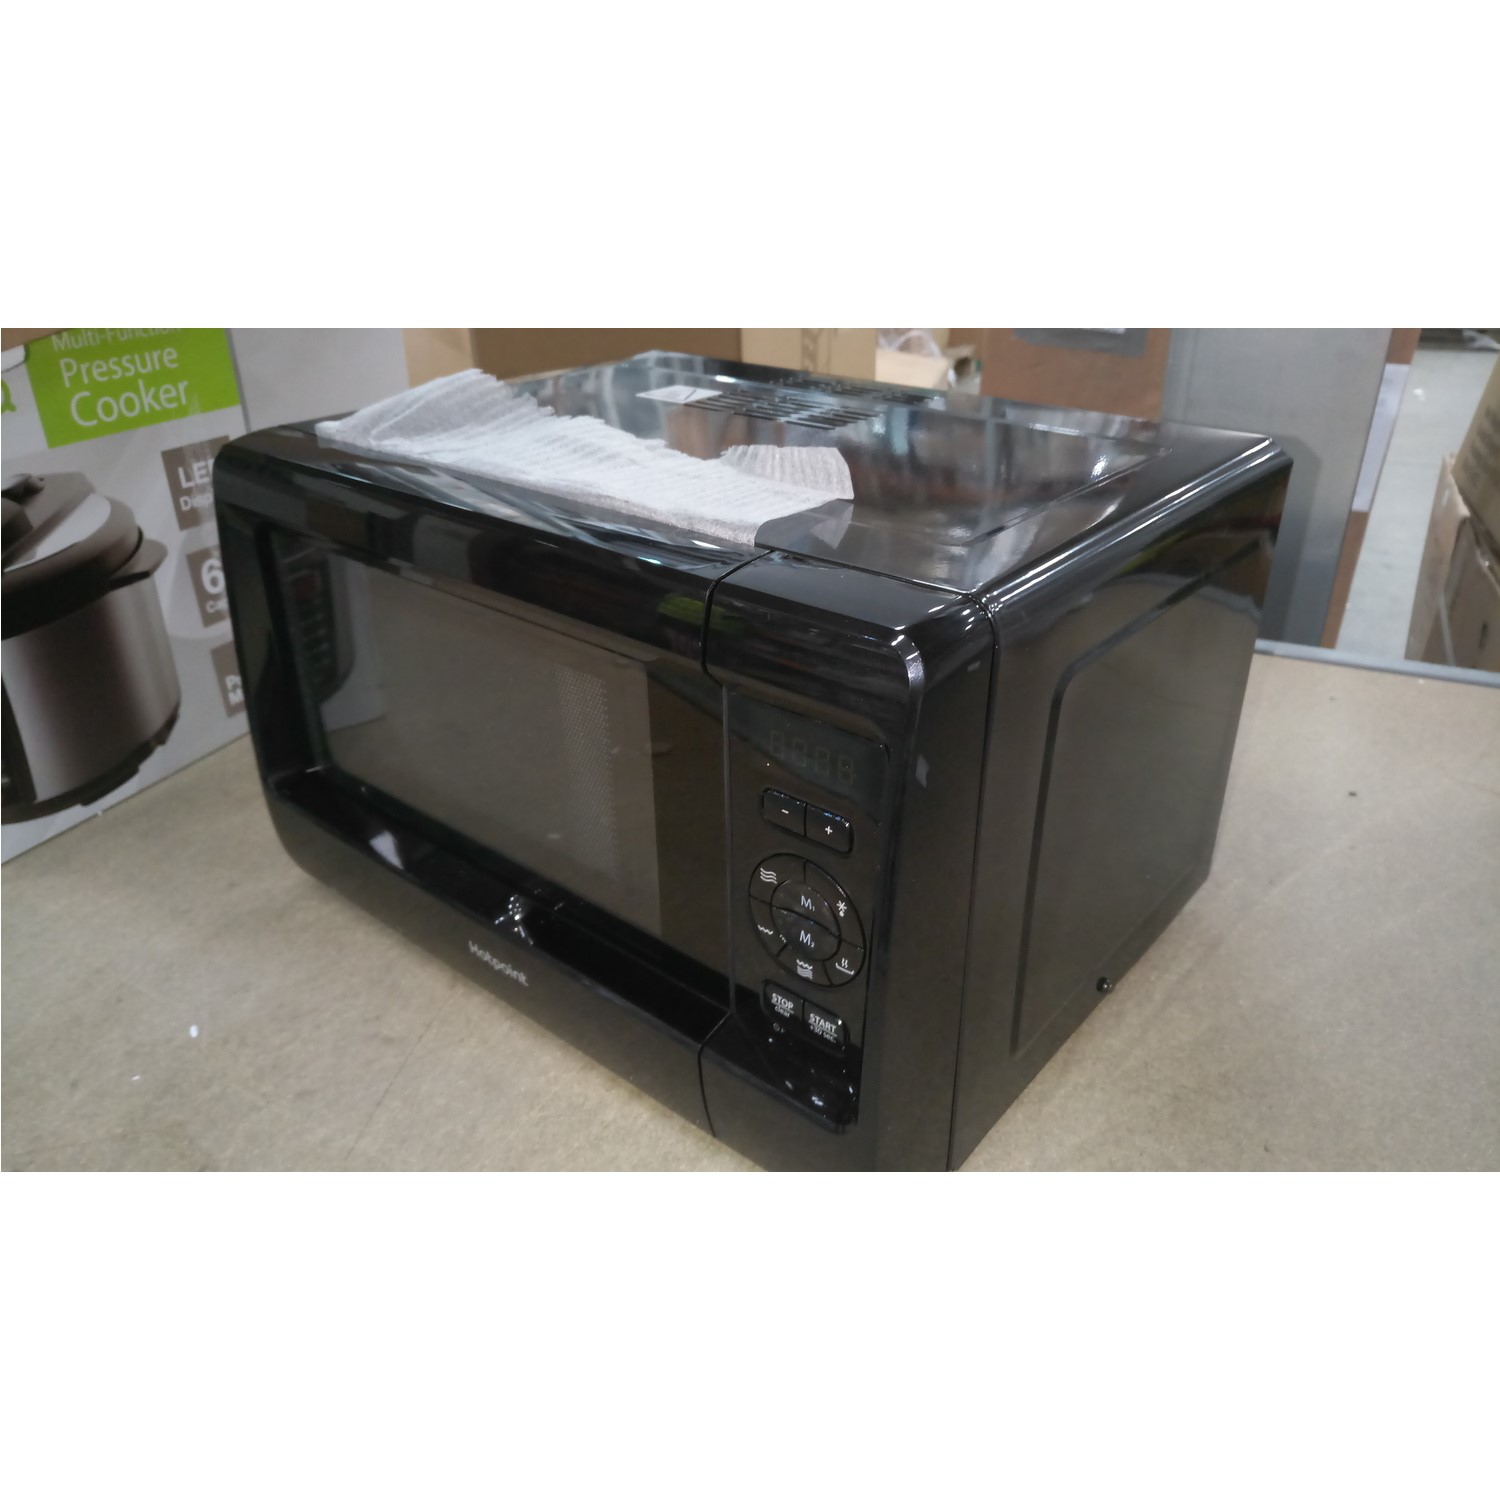 Hotpoint MWH2422MB 24L 750W Freestanding Microwave with Grill in Black